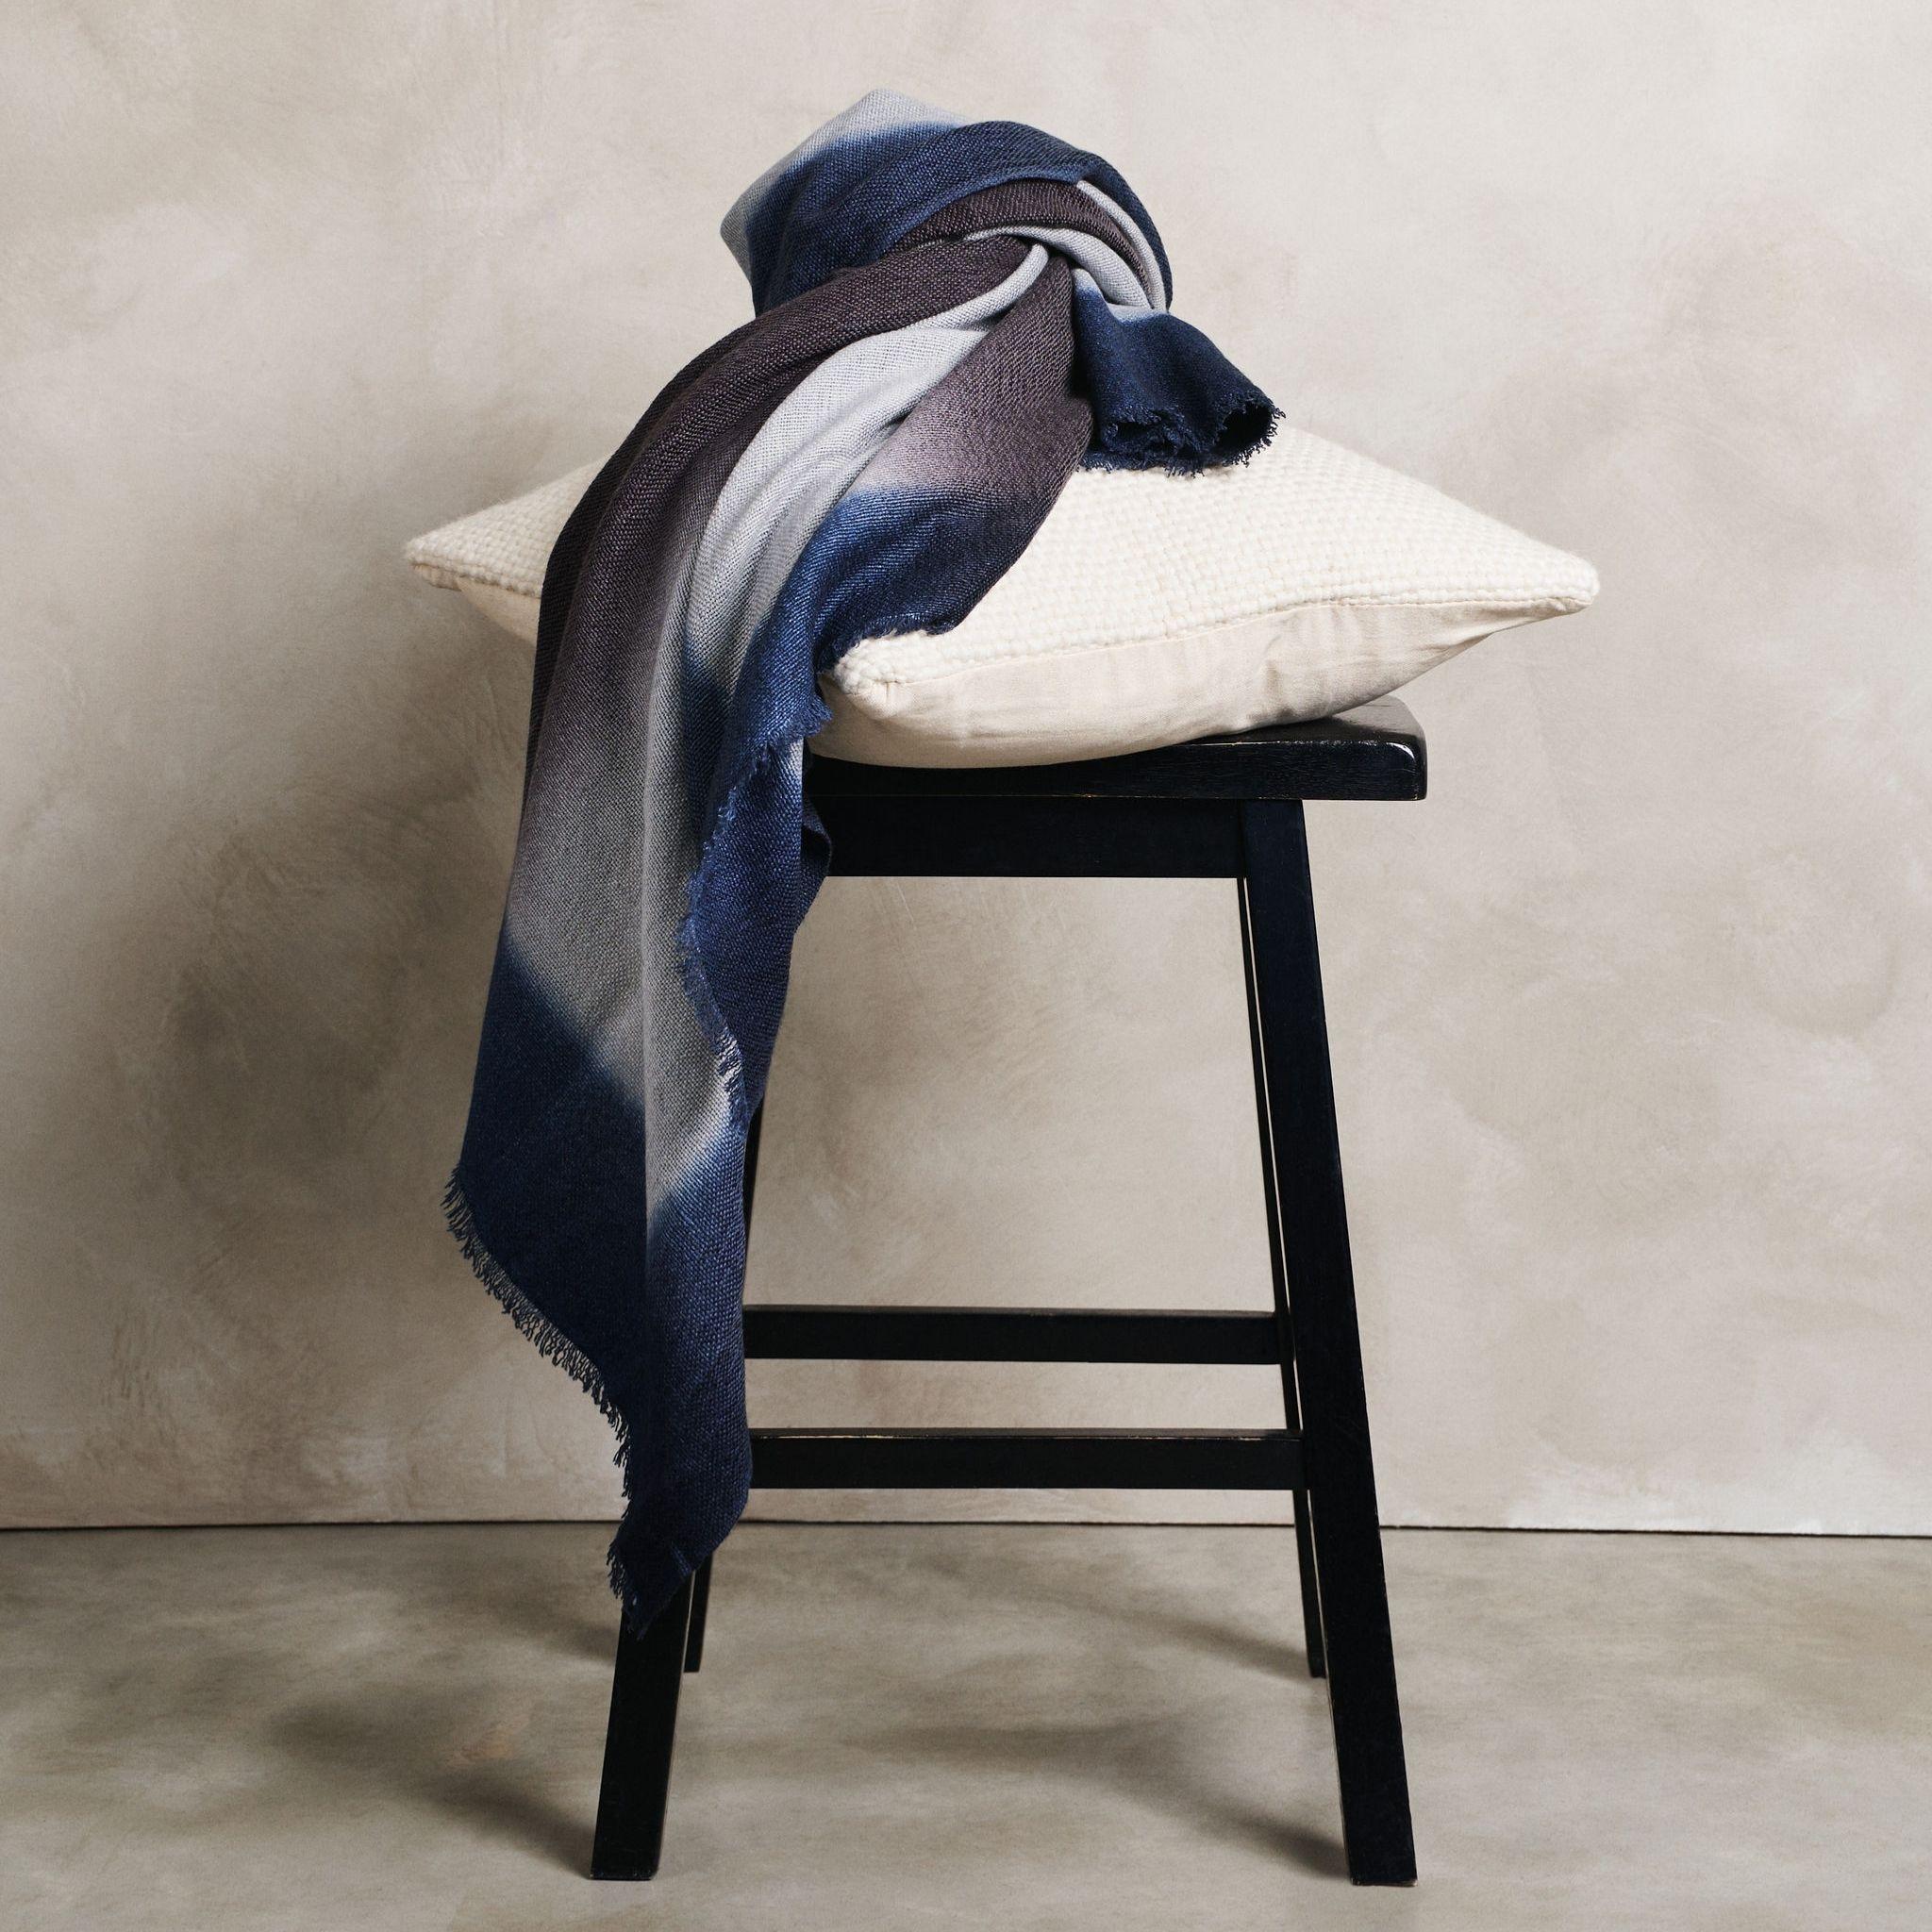 Moonstruck handloom merino  throw / blanket is handwoven by master weavers in Nepal and dip dyed entirely with certified Eco-friendly Swiss Dyes.

Each piece is individually dip dyed entirely using earth-friendly dyes. The design is comprised of